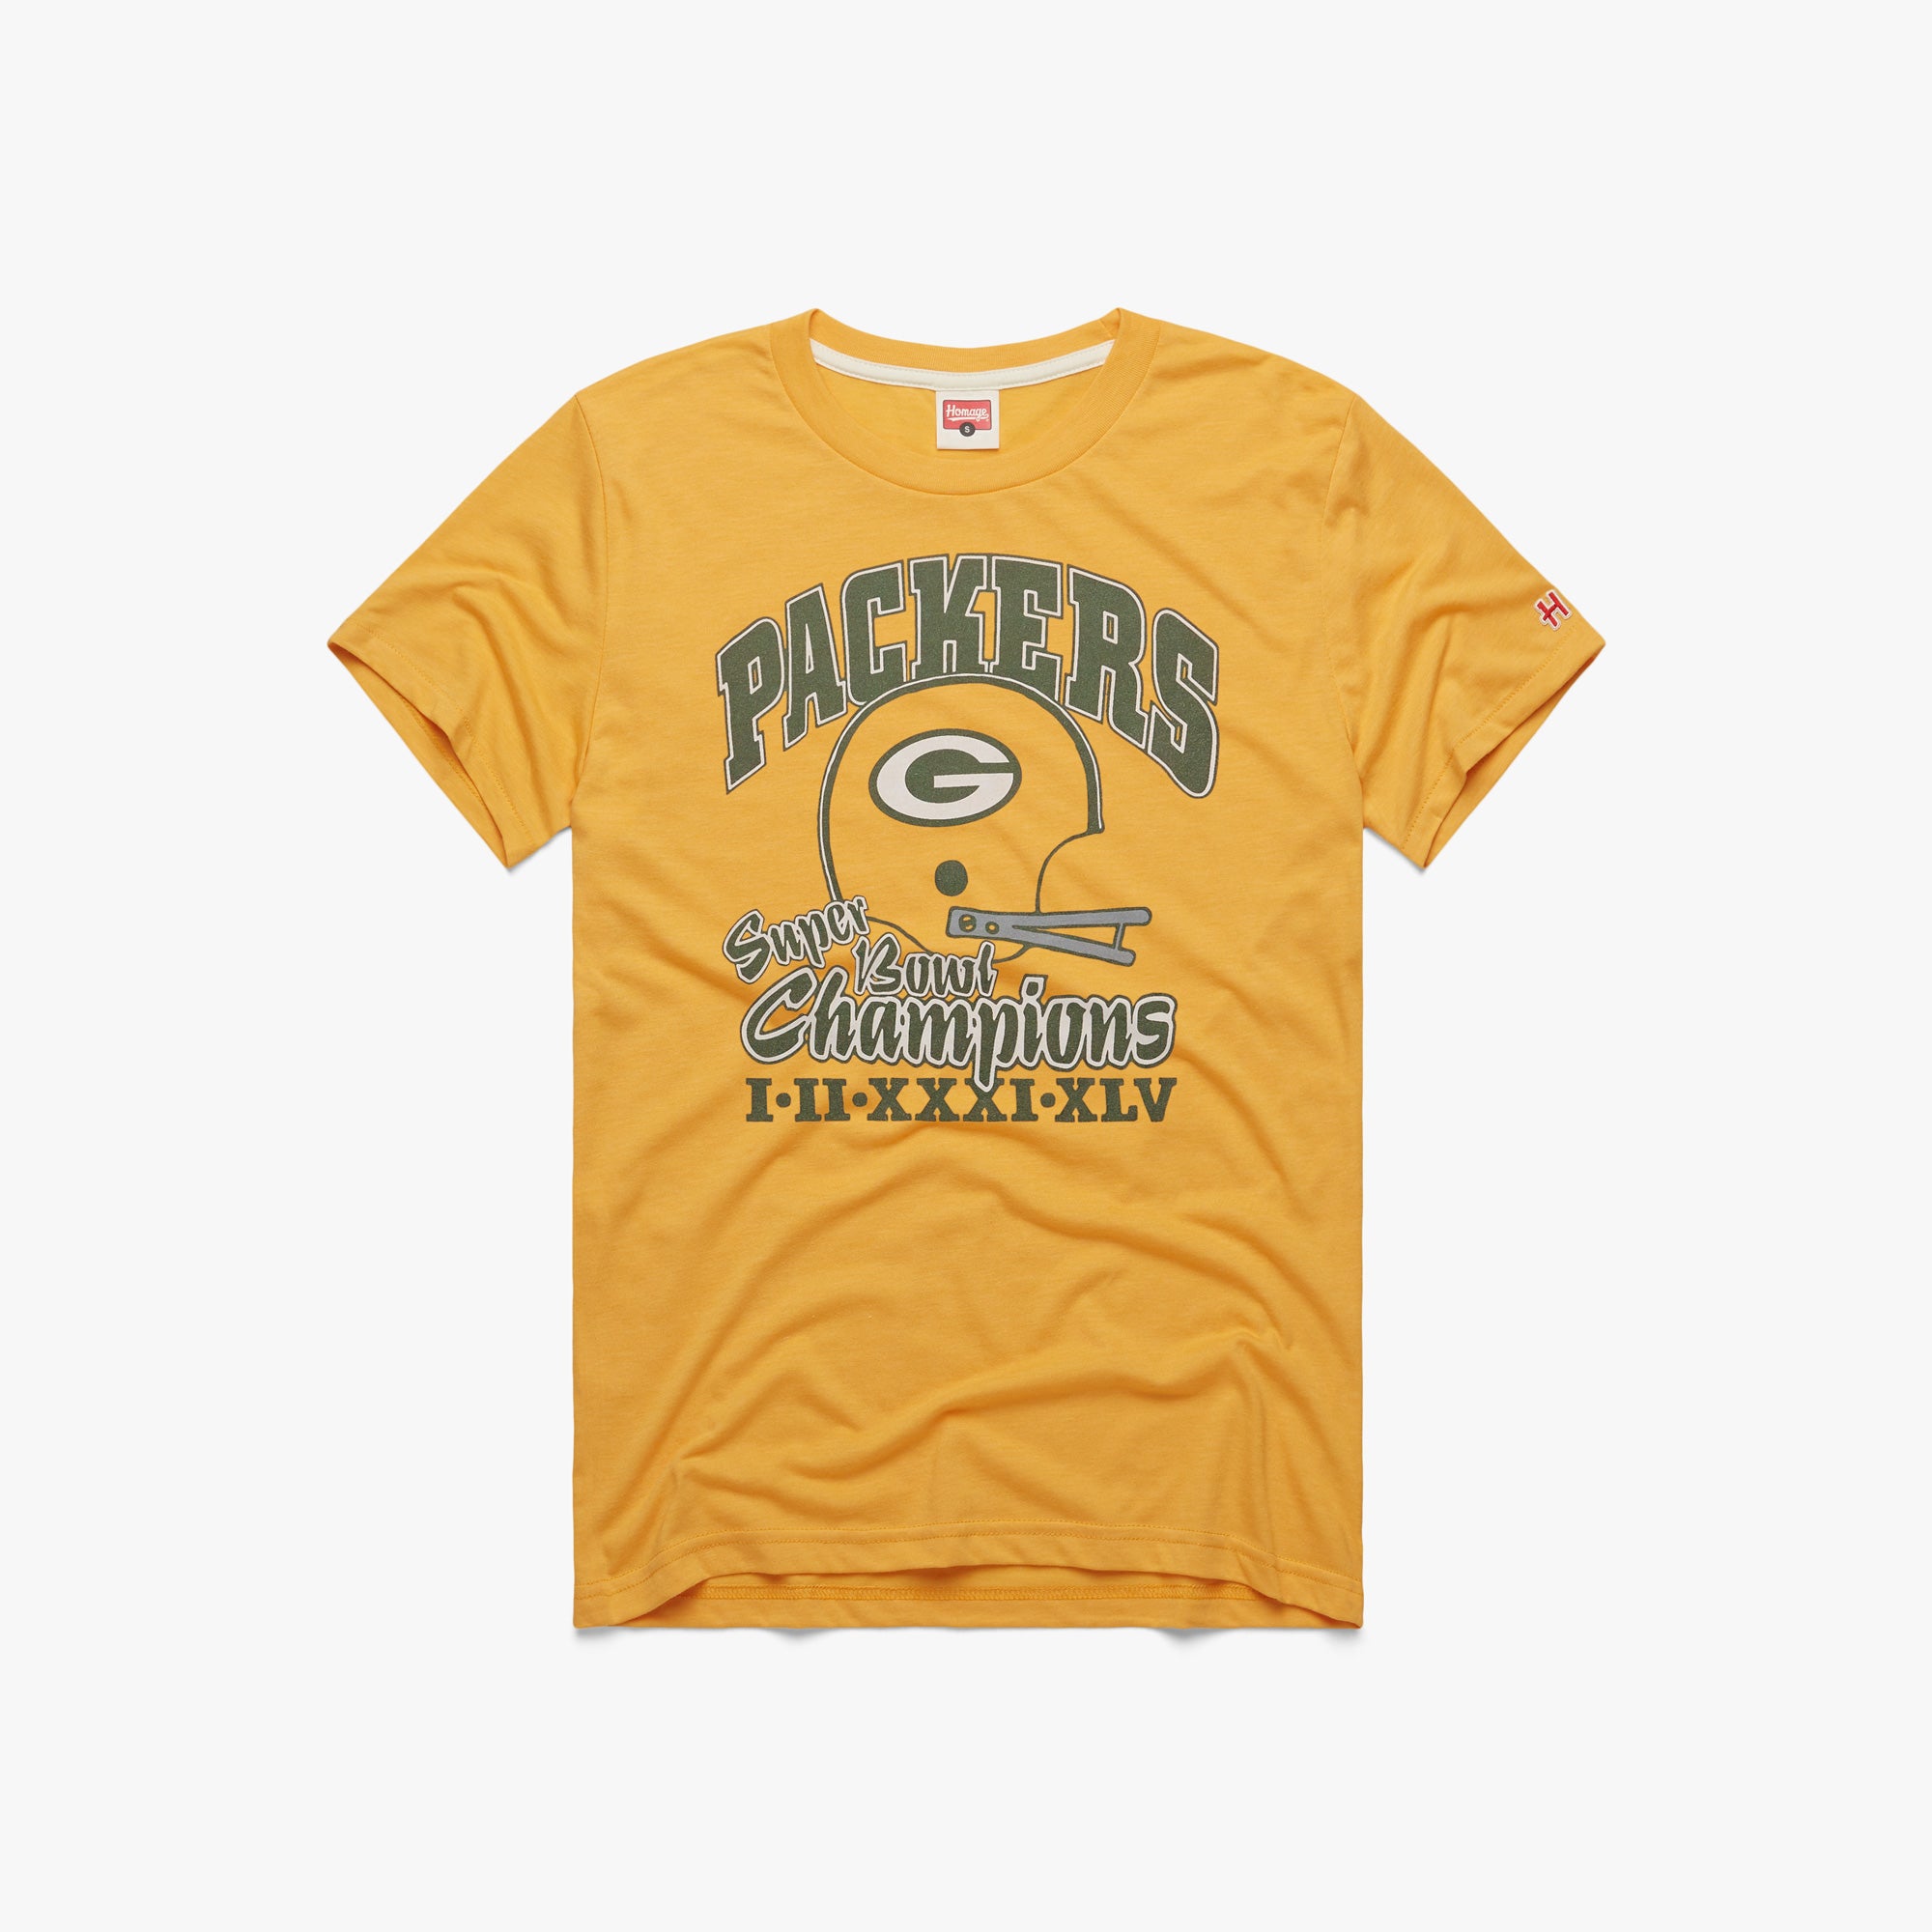 Packers 4 Time Super Bowl Champions Retro Green Bay Packers TShirt